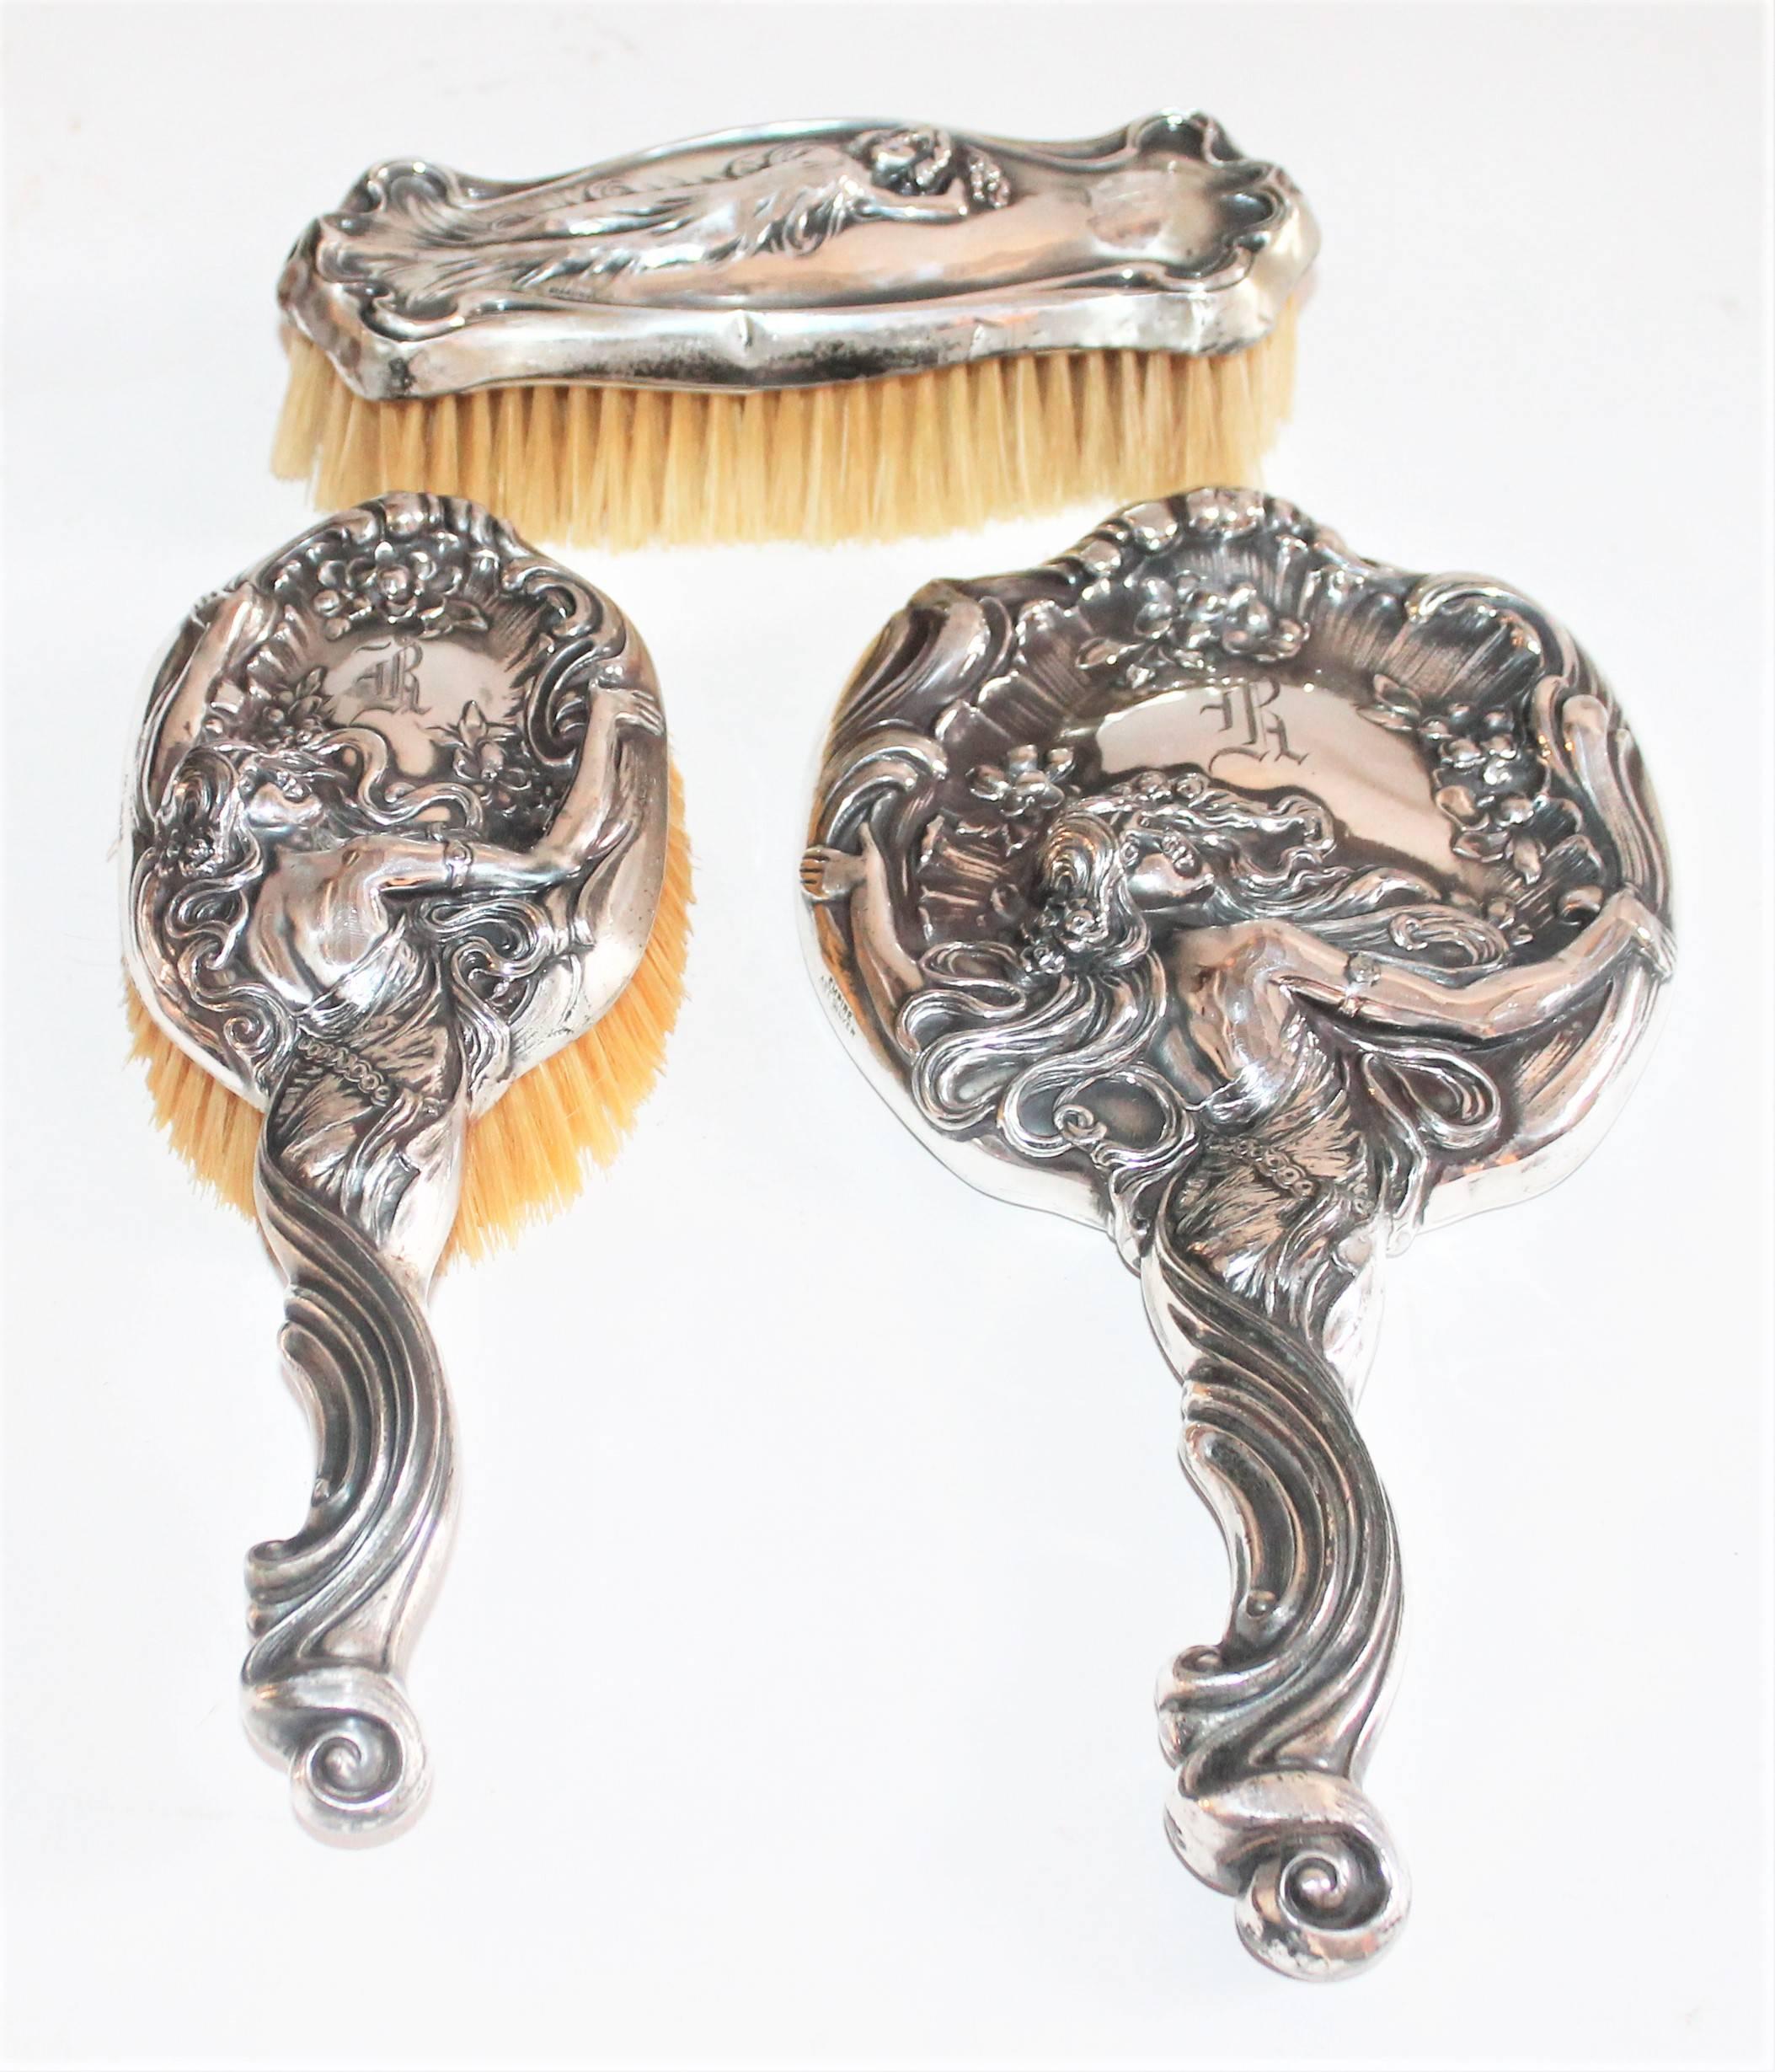 Art Nouveau set of sterling silver embossed brush, comb and mirror. With initial R engraved on them. Empire Art Silver. Dated May 24, 1904. 

Measures: brush 7in x 2.5in x 2in
comb 9in x 3.5in x 2.5in
mirror 10.5in x 1.5in x 5.5in.